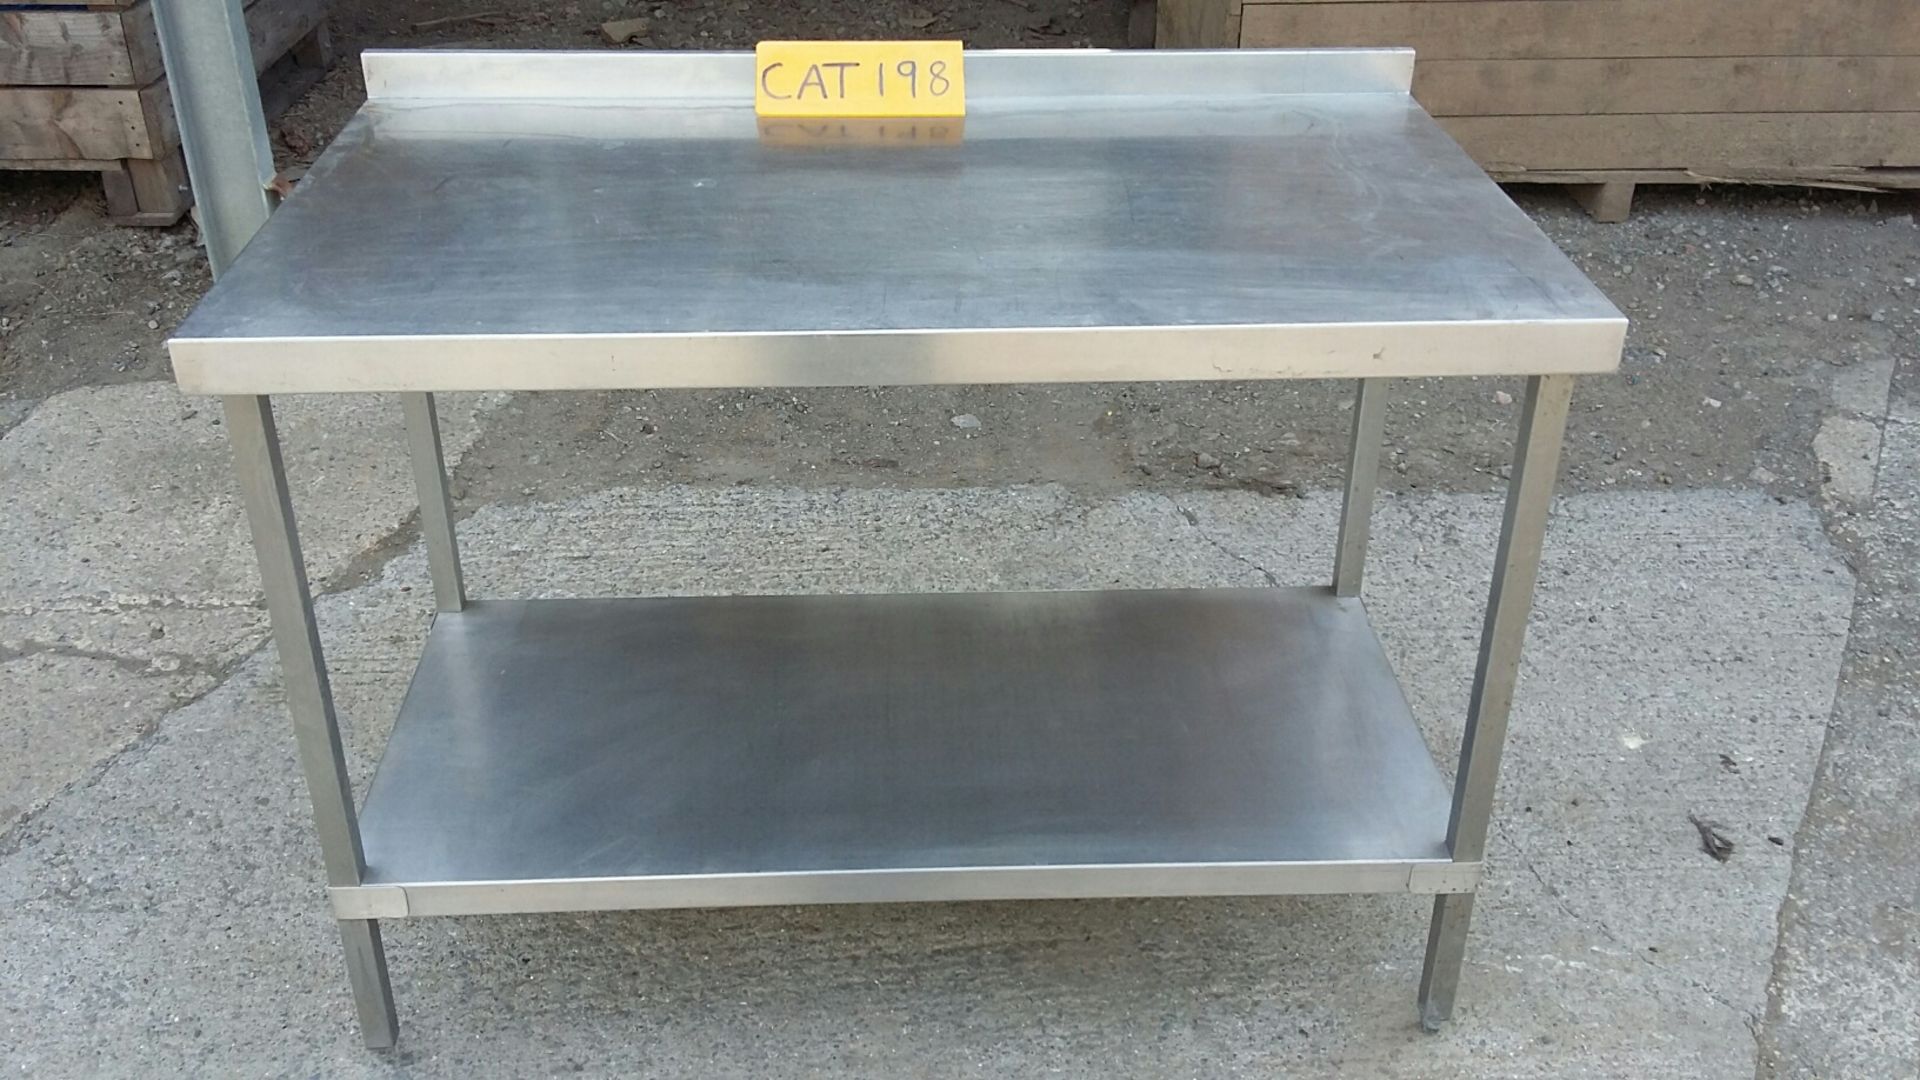 Stainless Steel Table, with one shelf